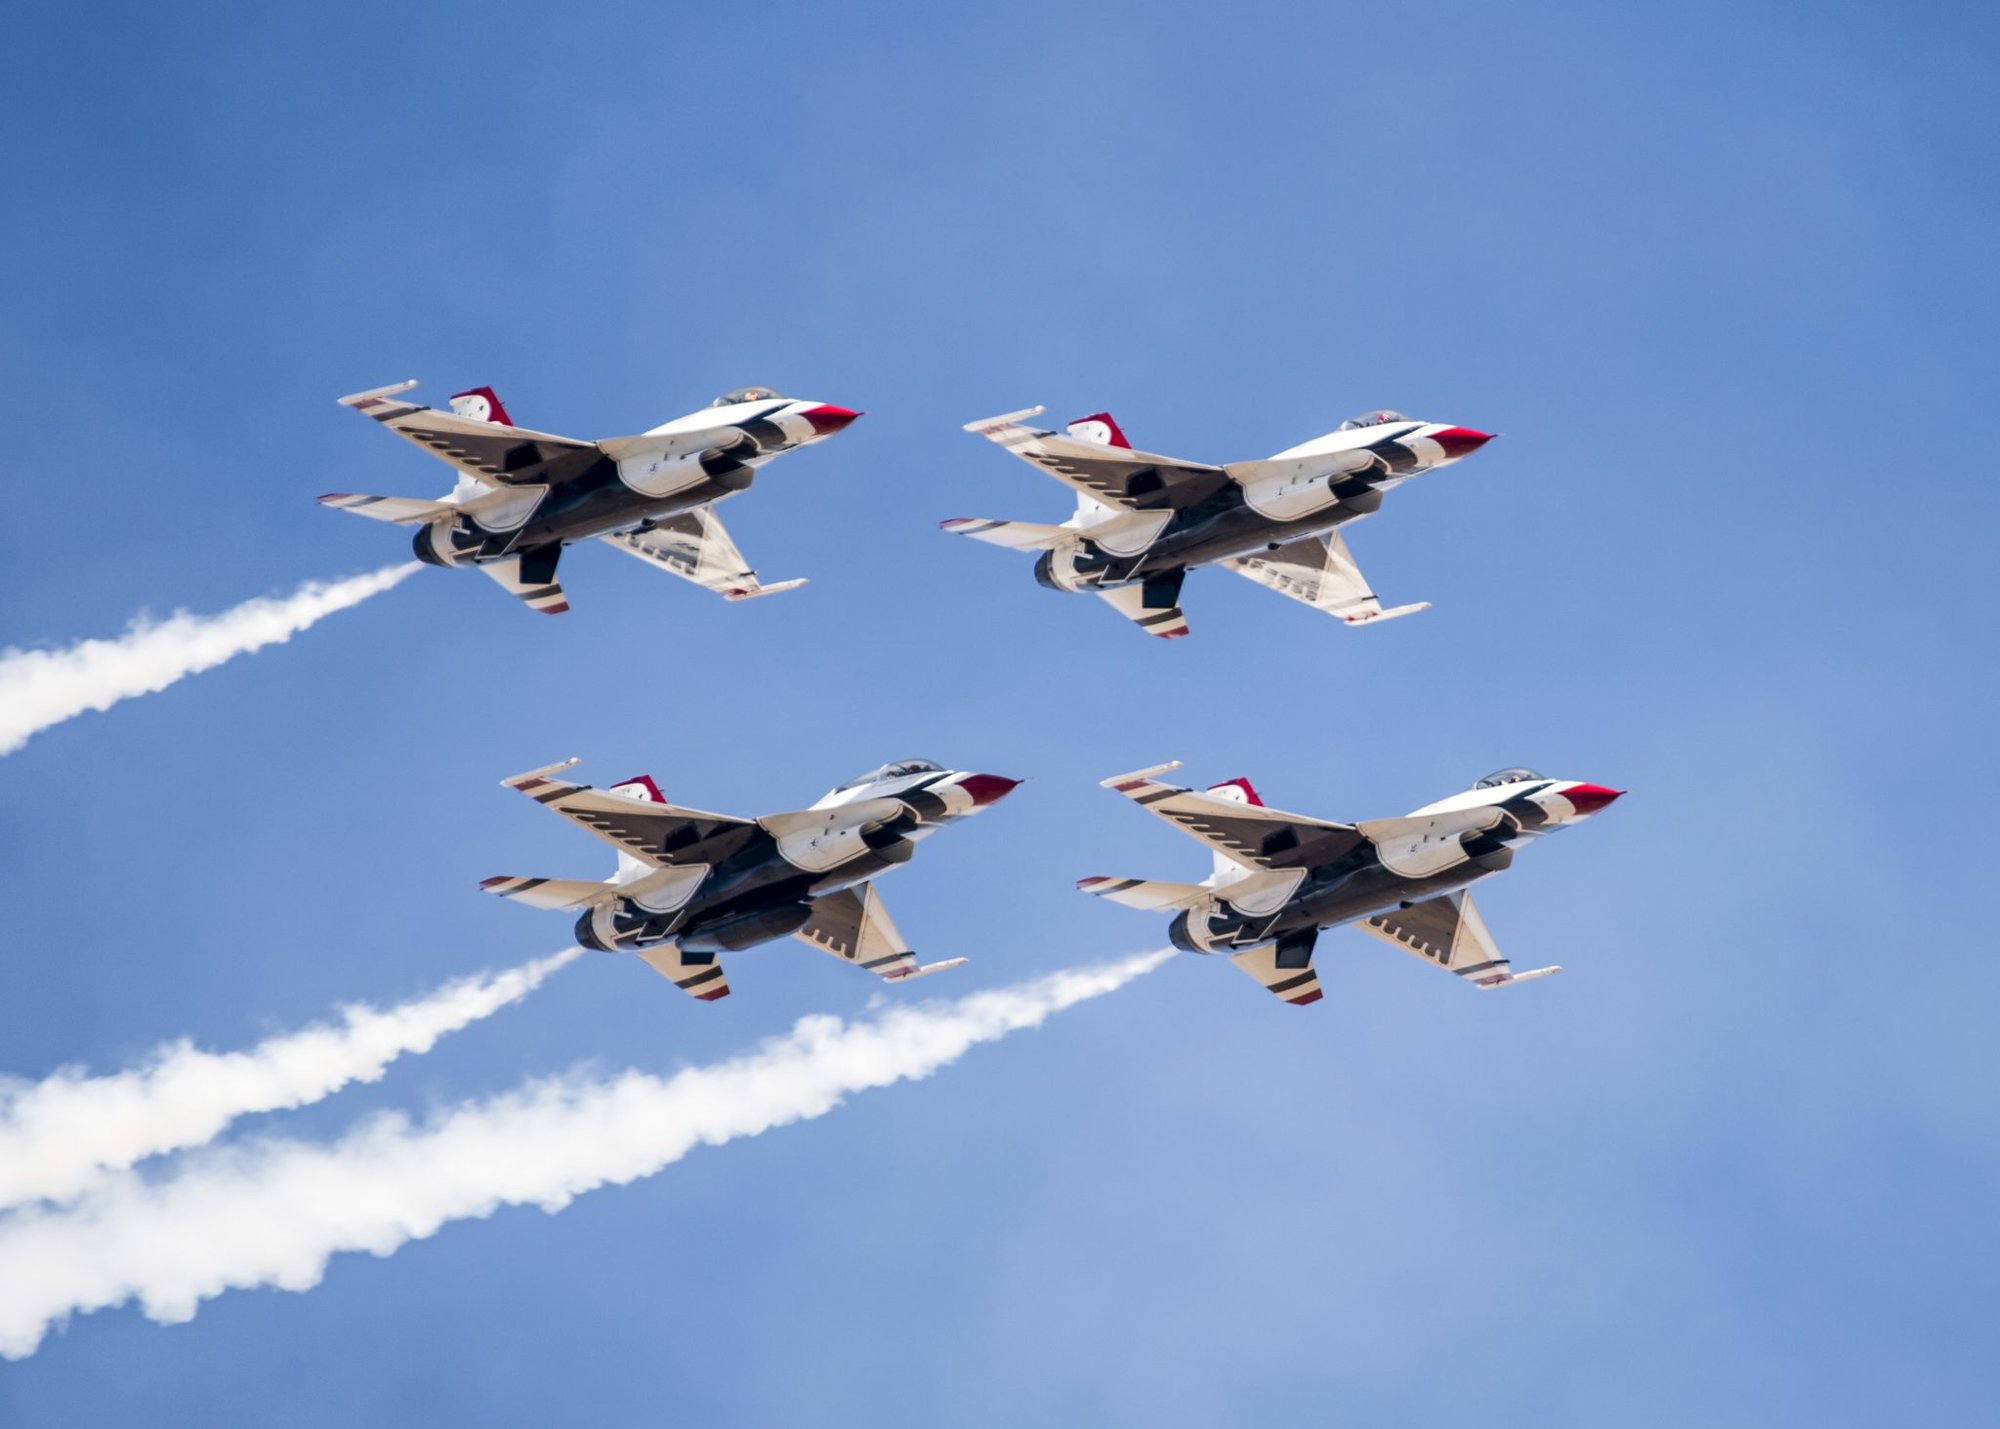 F-16 Fighting Falcons from the US Air Force’s Thunderbirds air demonstration squadron perform during the California Capital Airshow Oct. 3, 2015, at Sacramento’s Mather Airport. US Air Force photo by Senior Airman Jason Couillard.